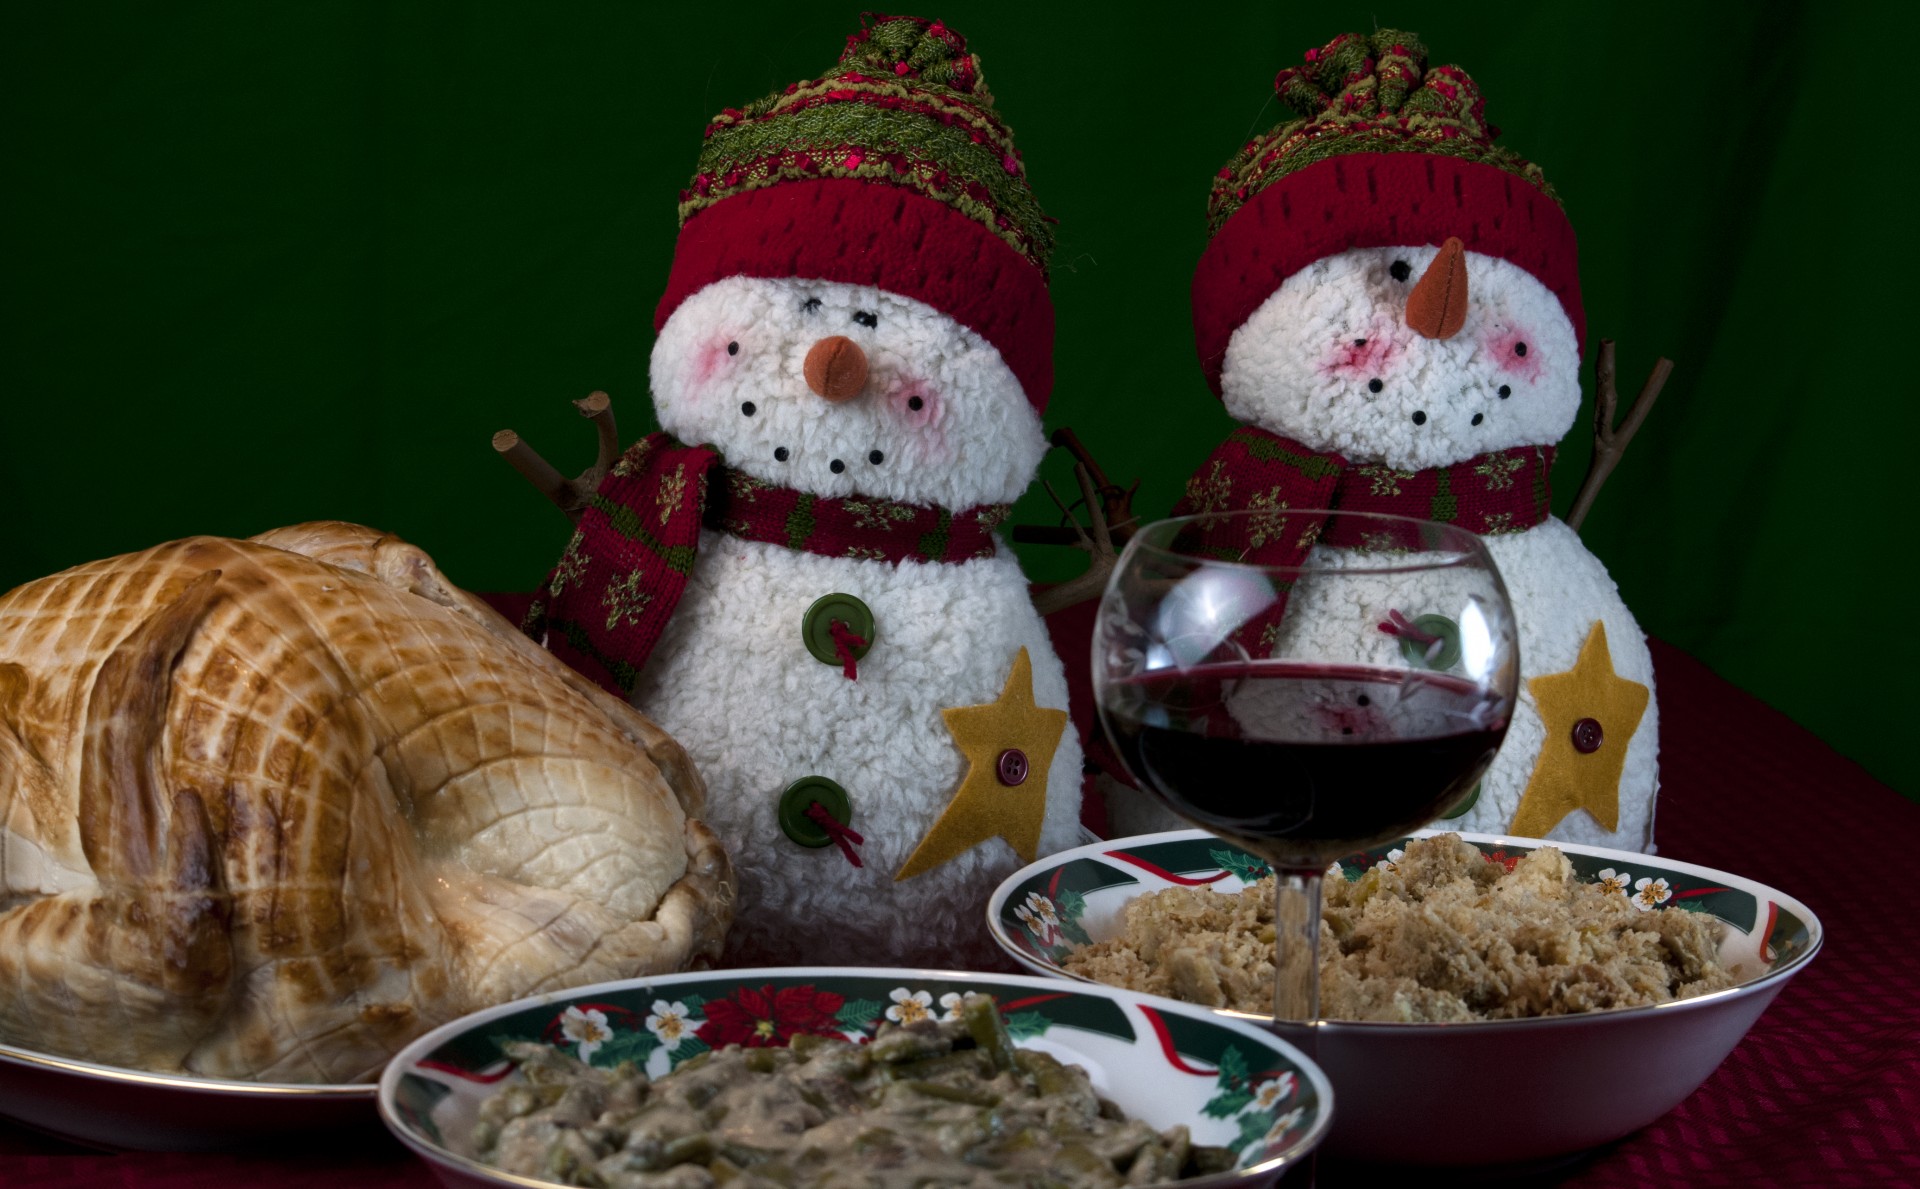 Two darling snowmen decorate this table setting of a turkey, green beans, dressing and a glass of wine set in xmas china